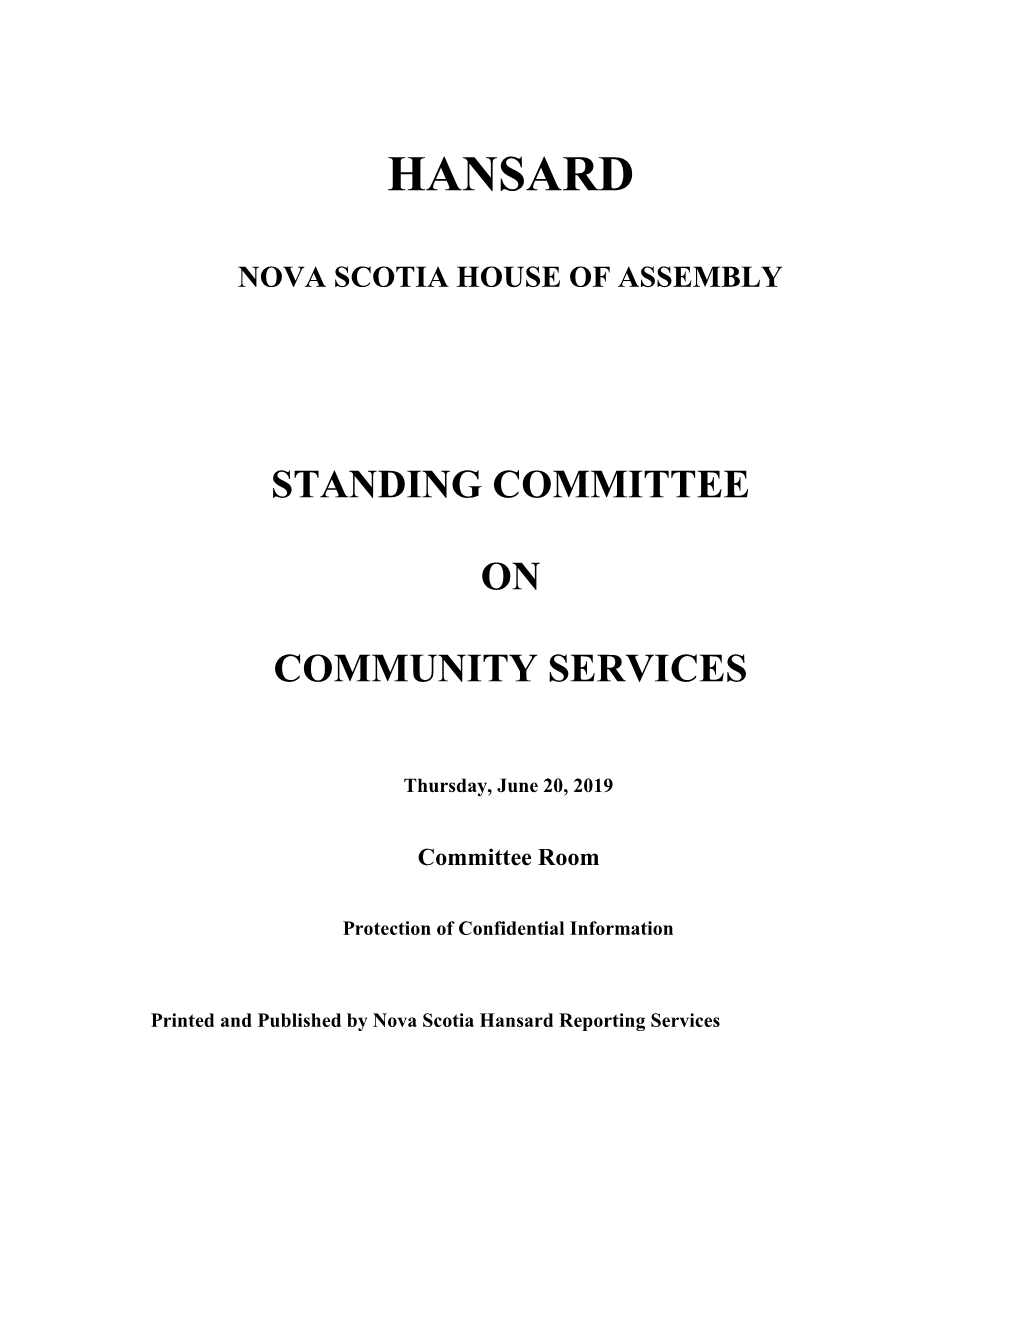 Community Services Committee 20-06-2019